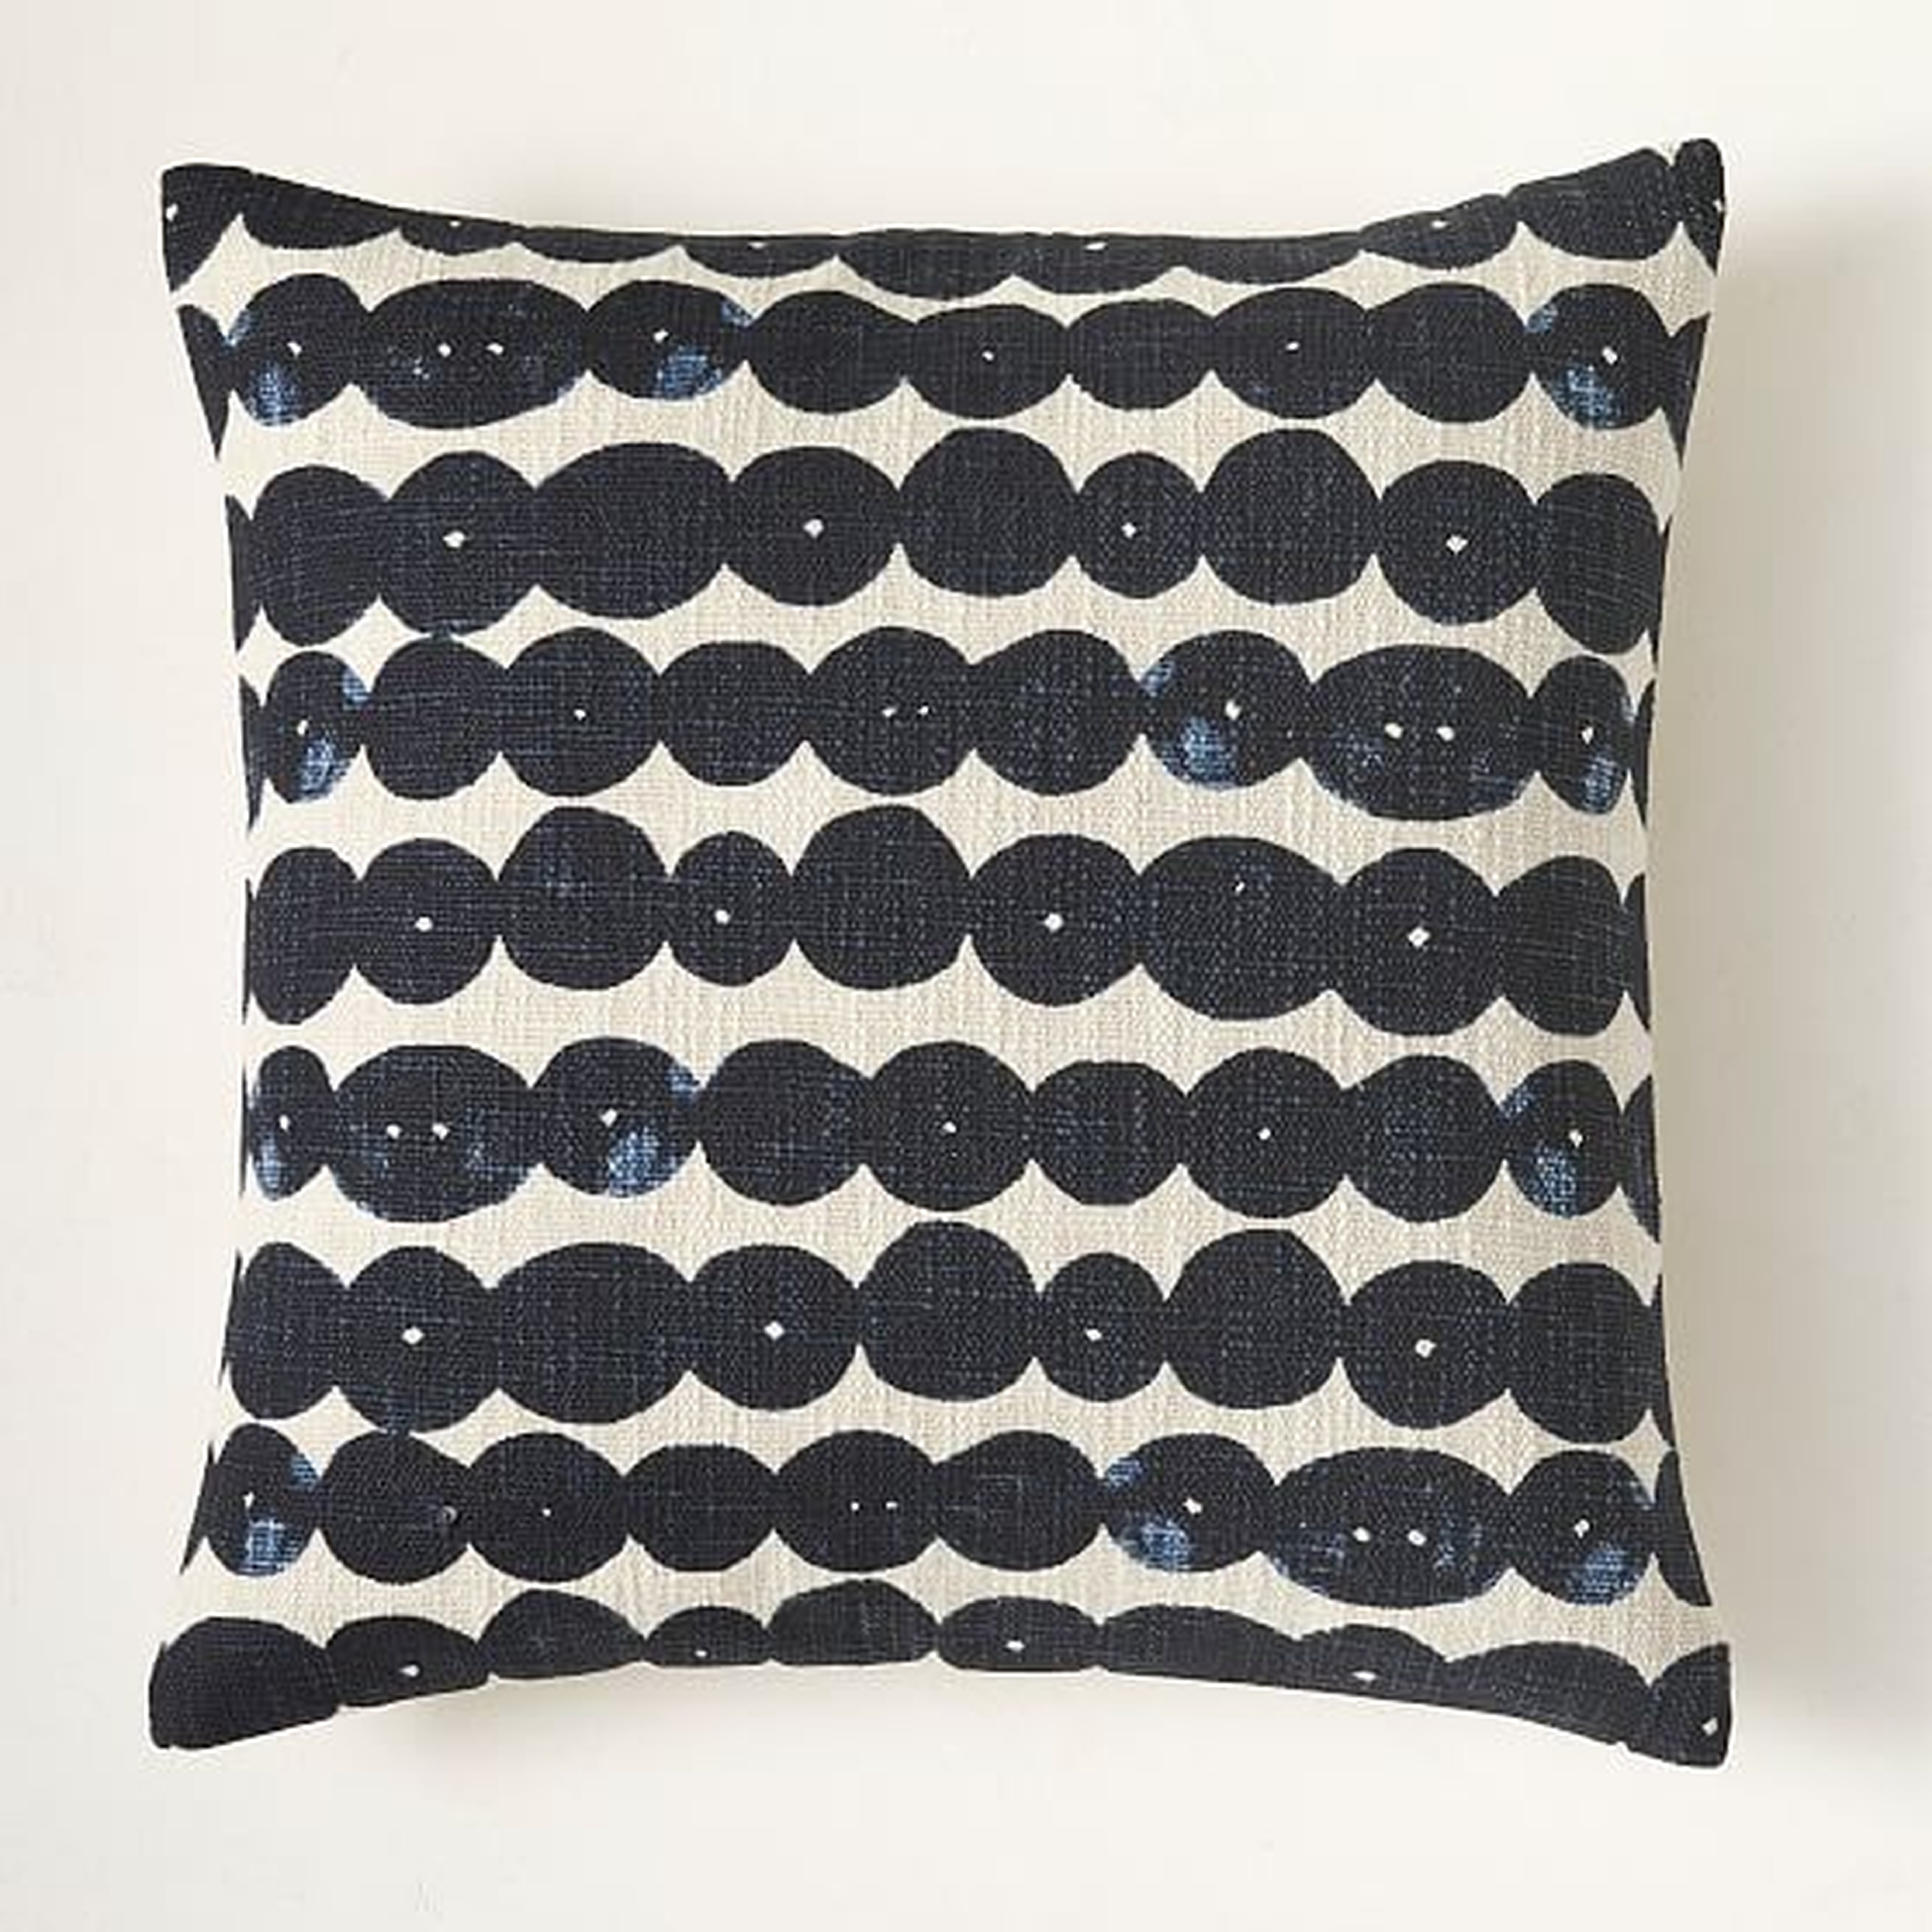 Stacked Shapes Pillow Cover, 20"x20", Midnight - West Elm